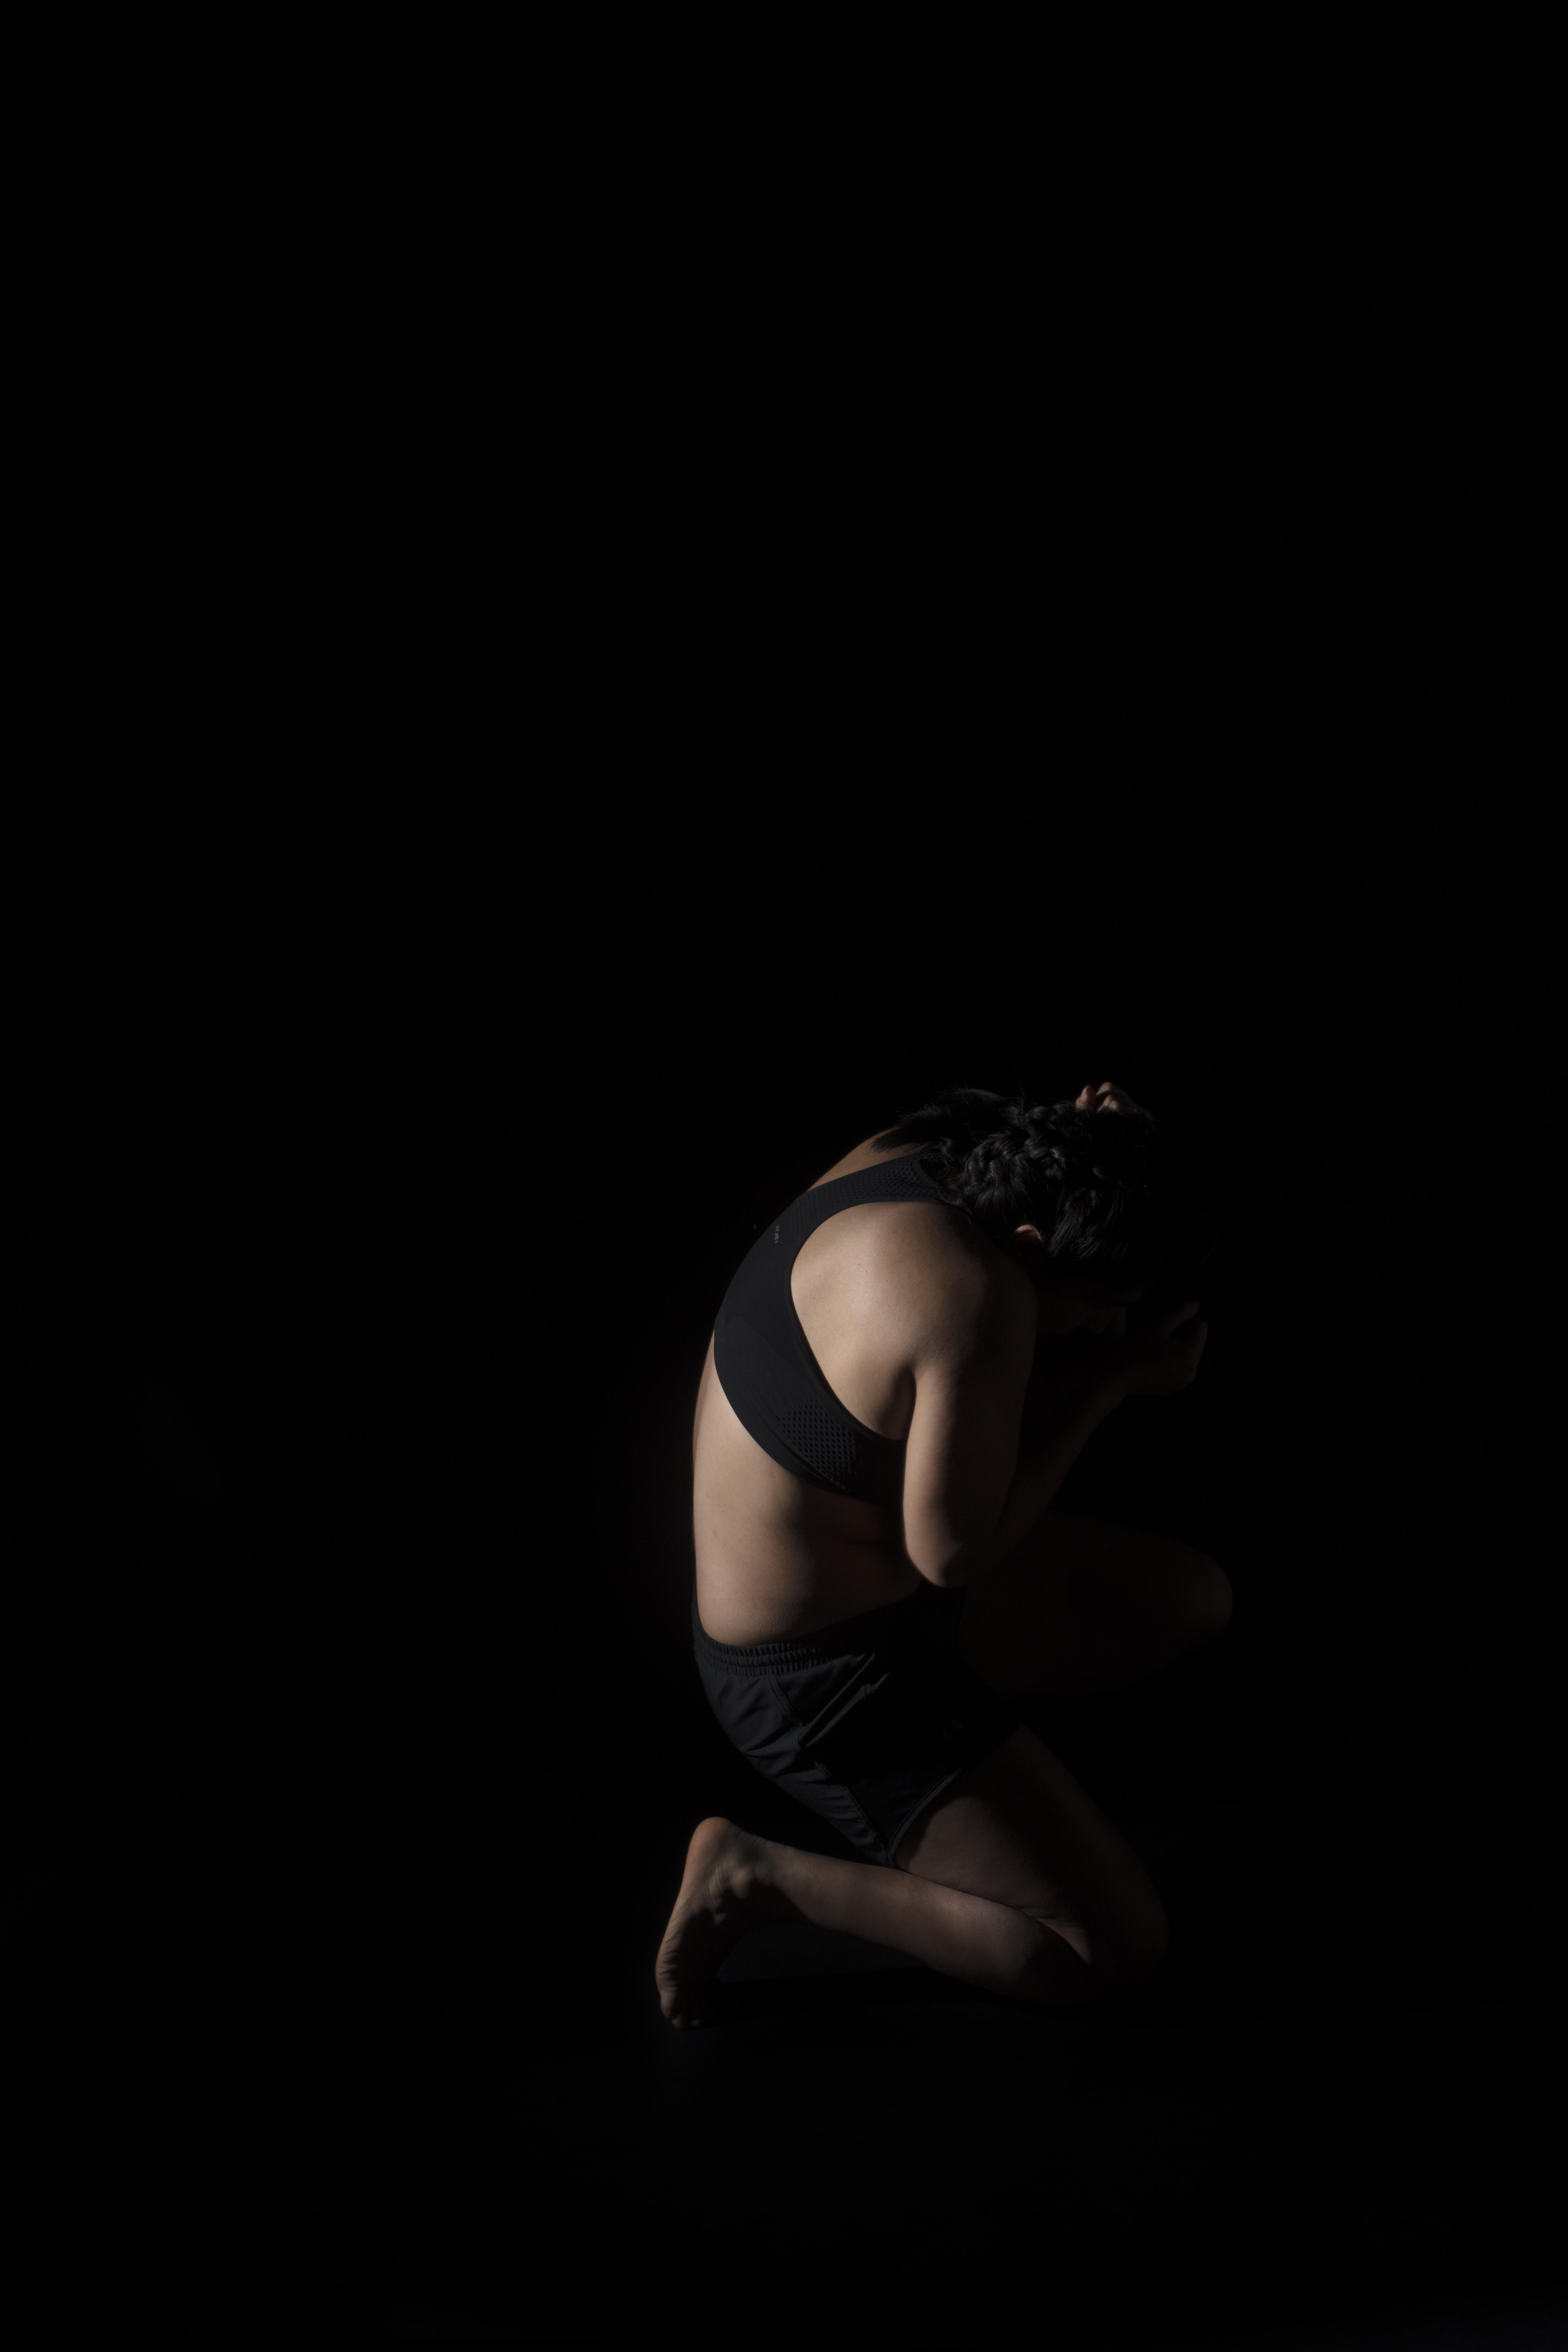 A person crouches in a dark space on one knee, sheilding their face from the light.